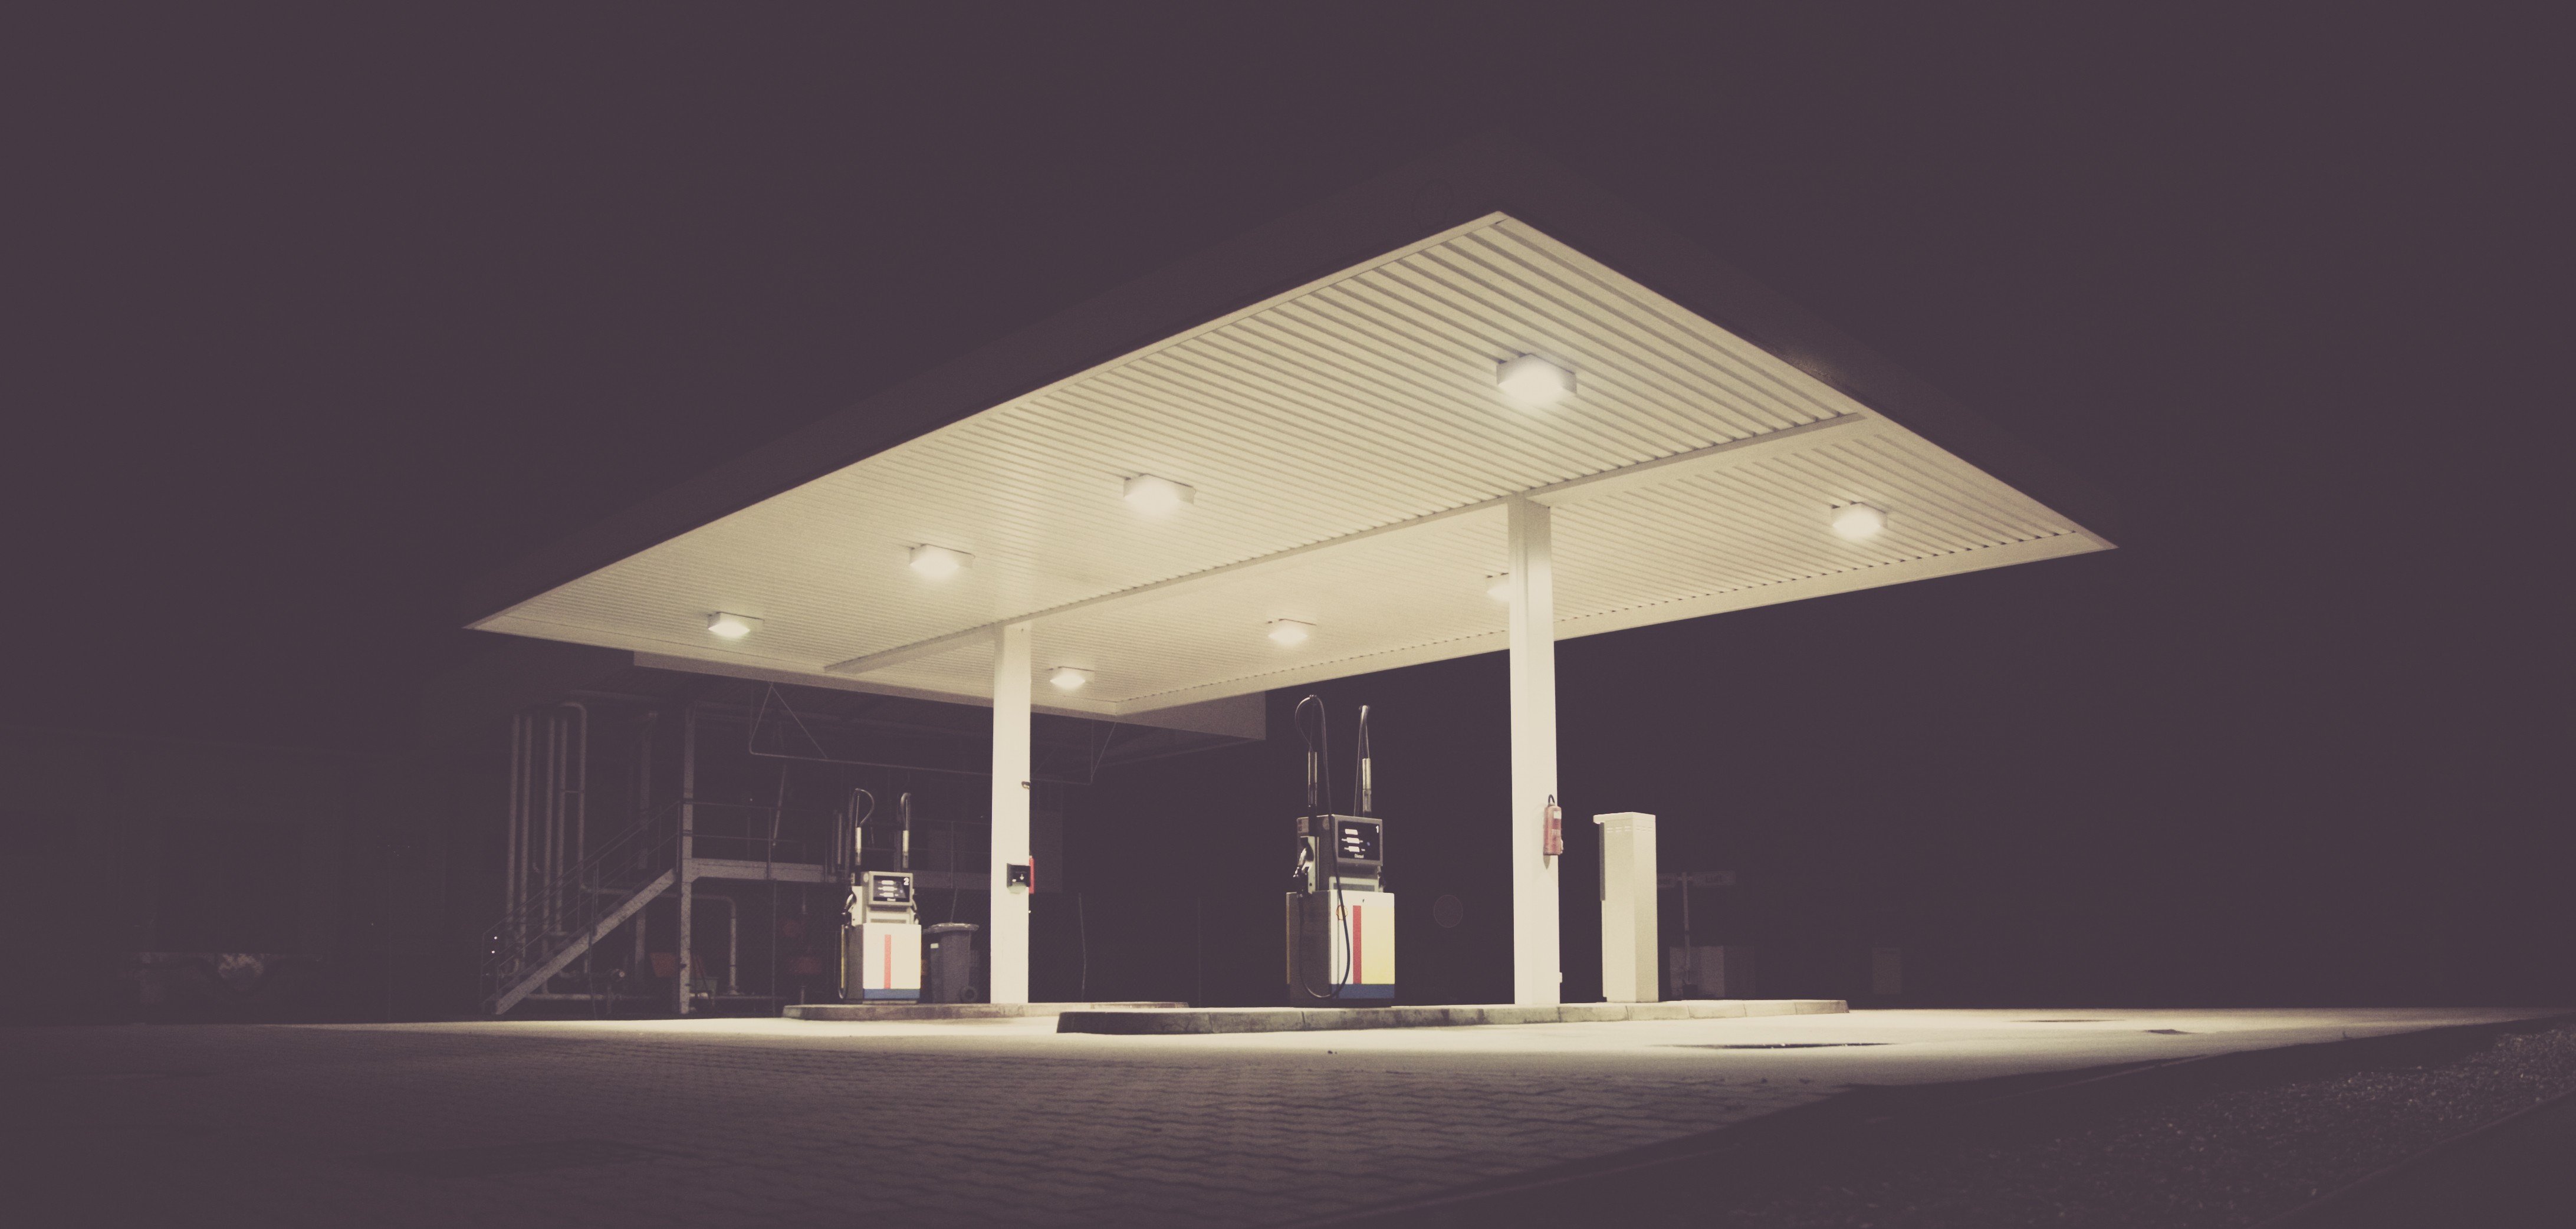 urban, Gas stations Wallpapers HD / Desktop and Mobile Backgrounds